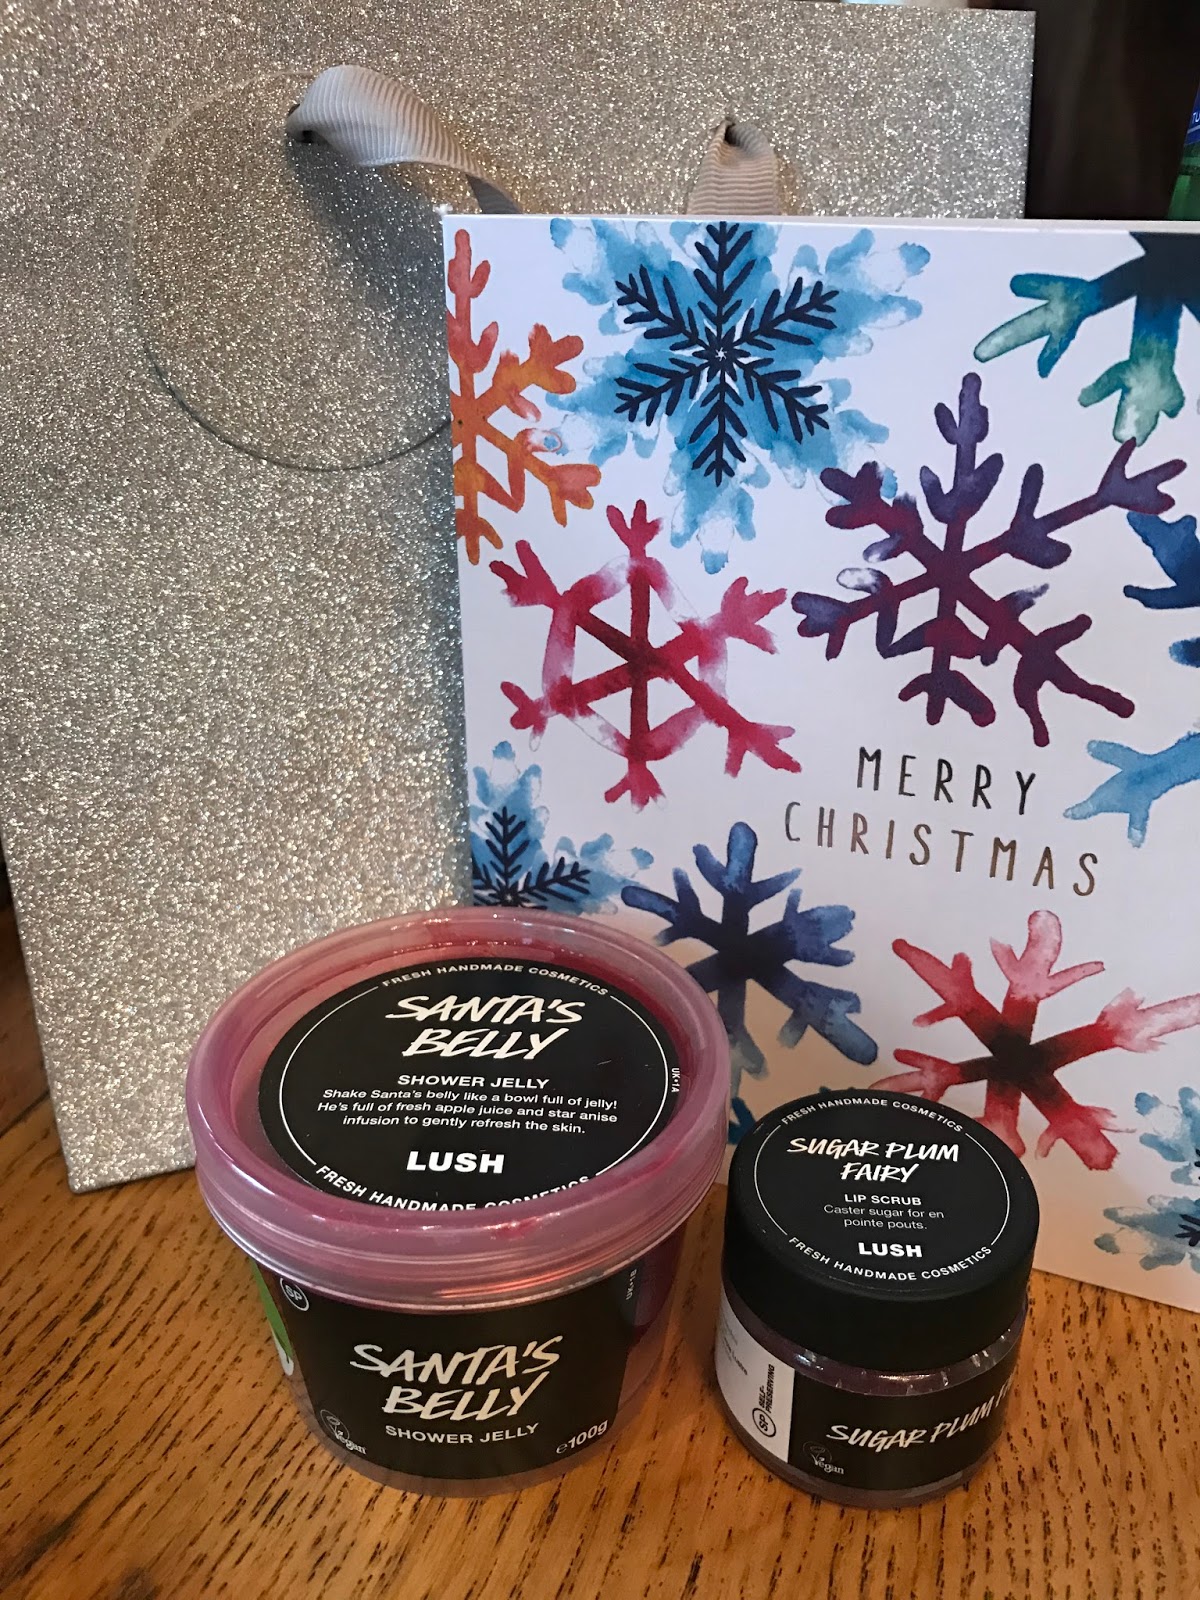 Lush Christmas products